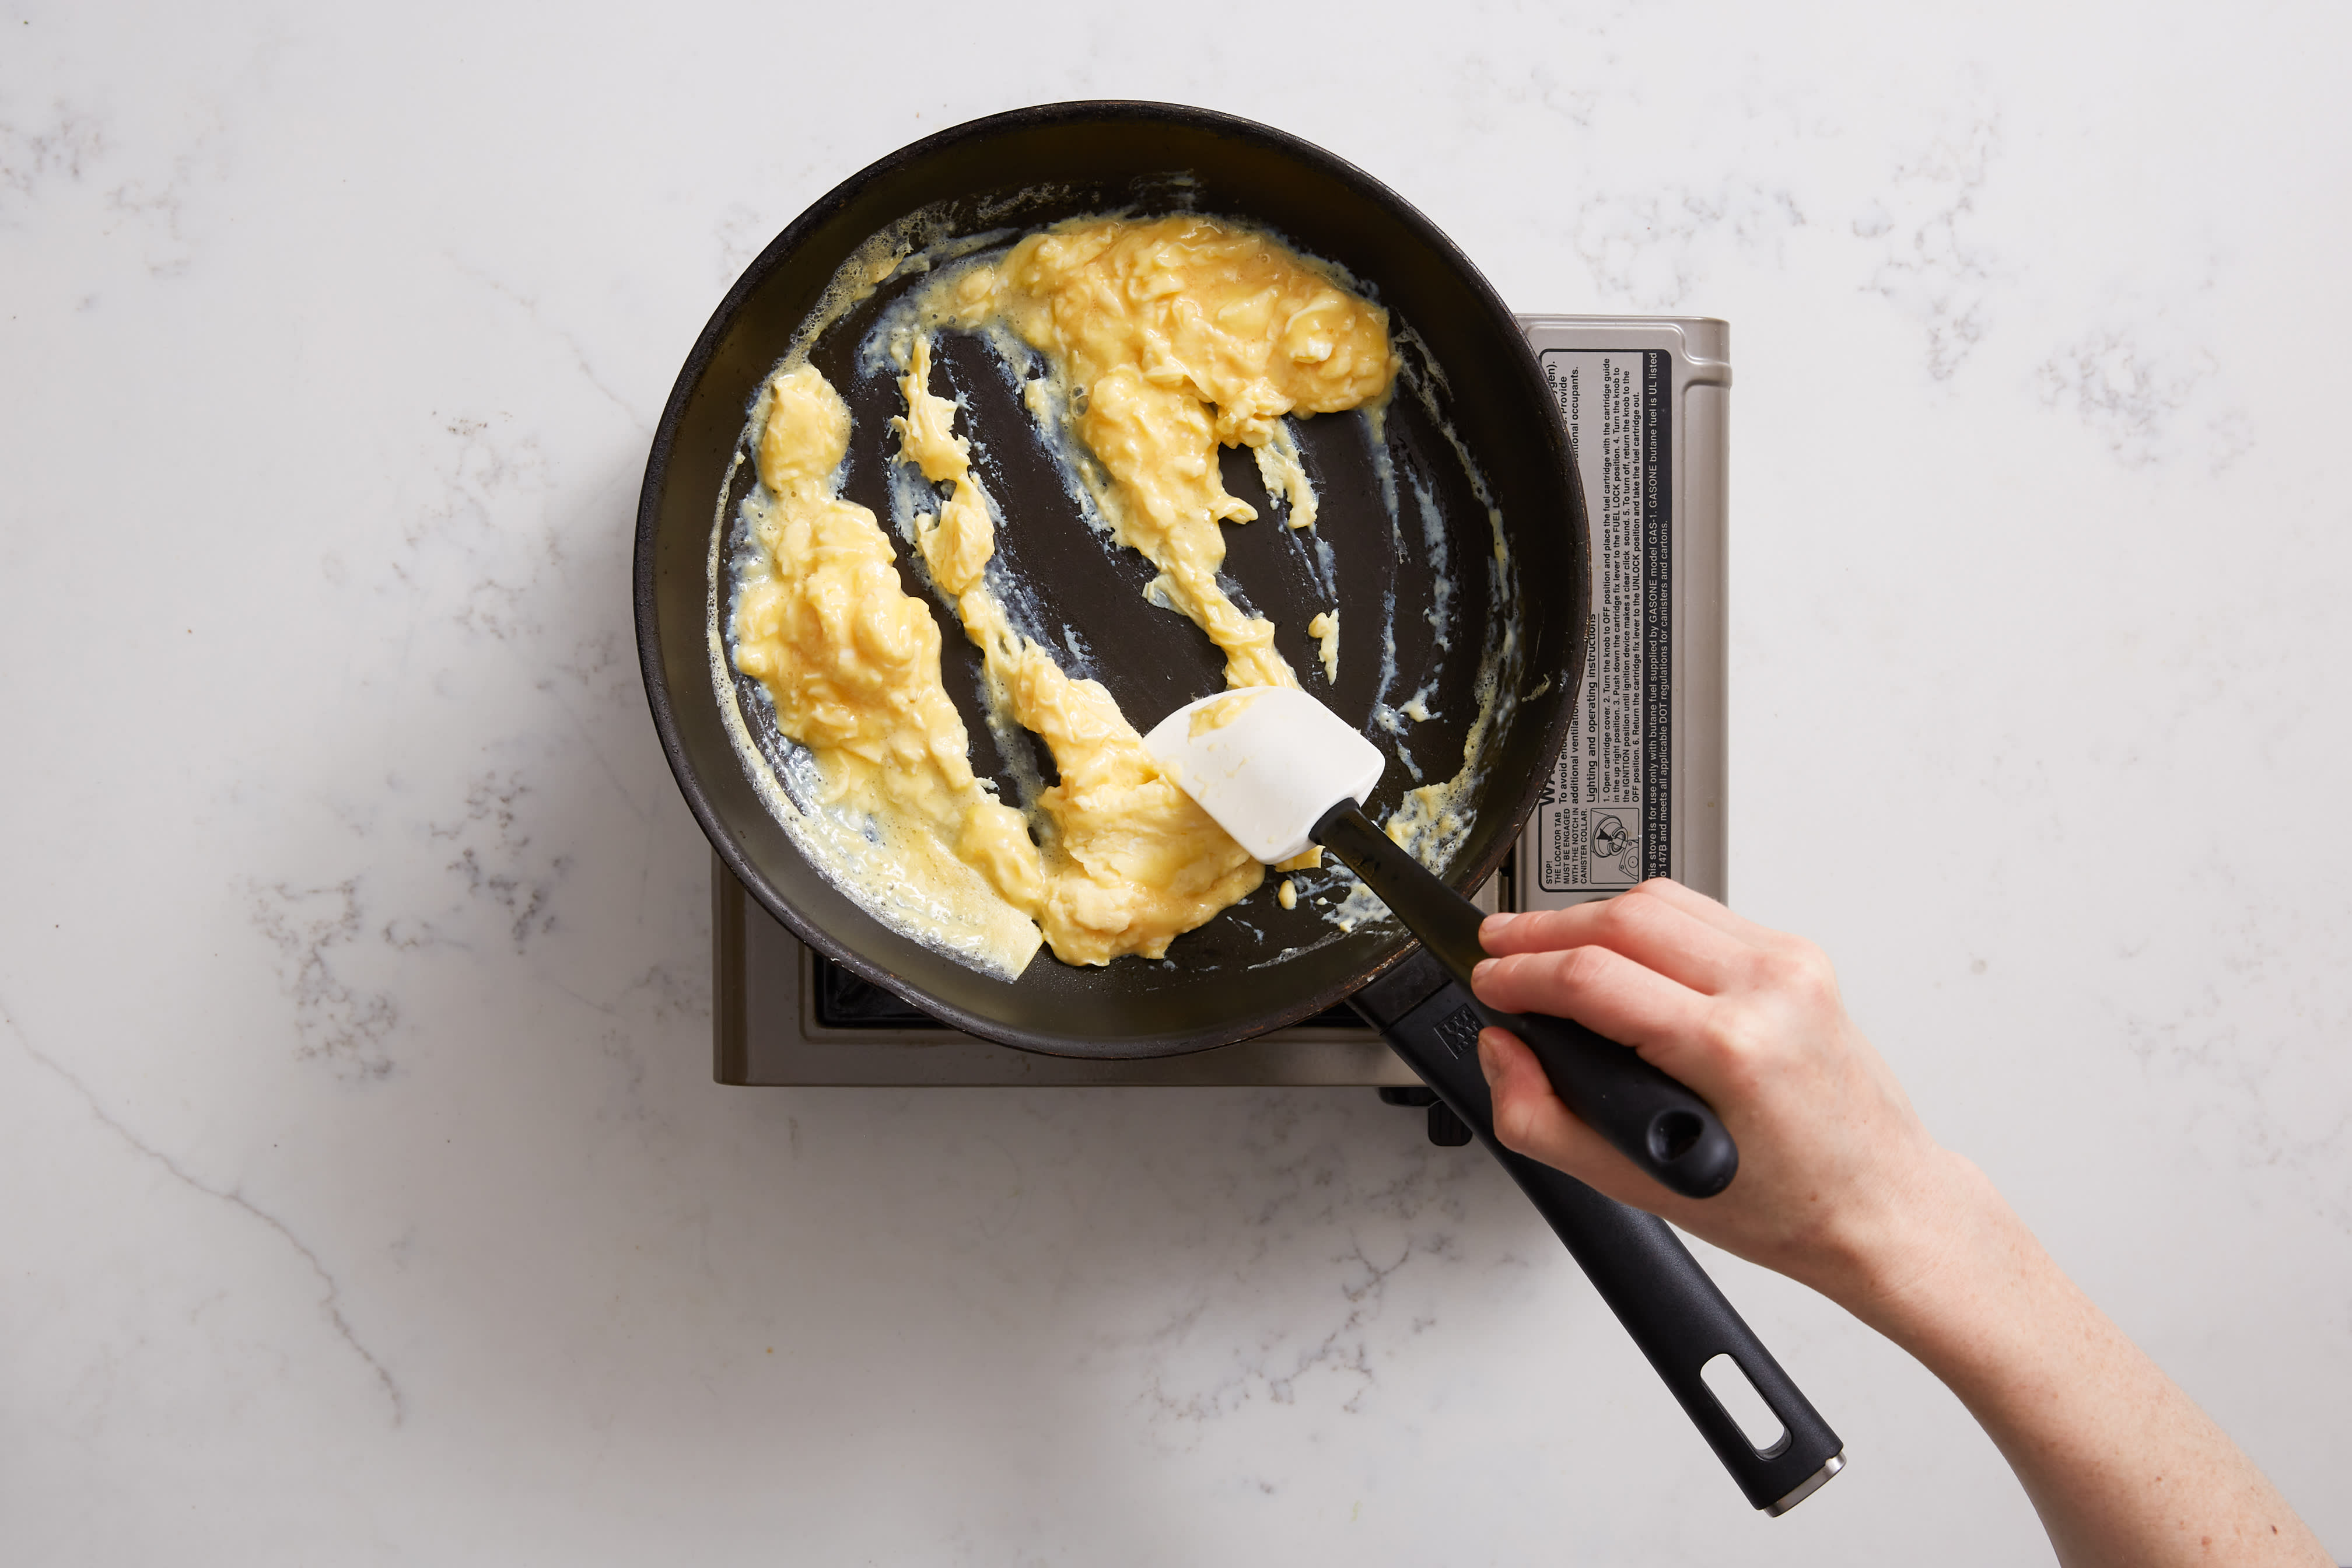 We Tested the Best Egg Pans for Perfect Omelets, Scrambled Eggs, and More